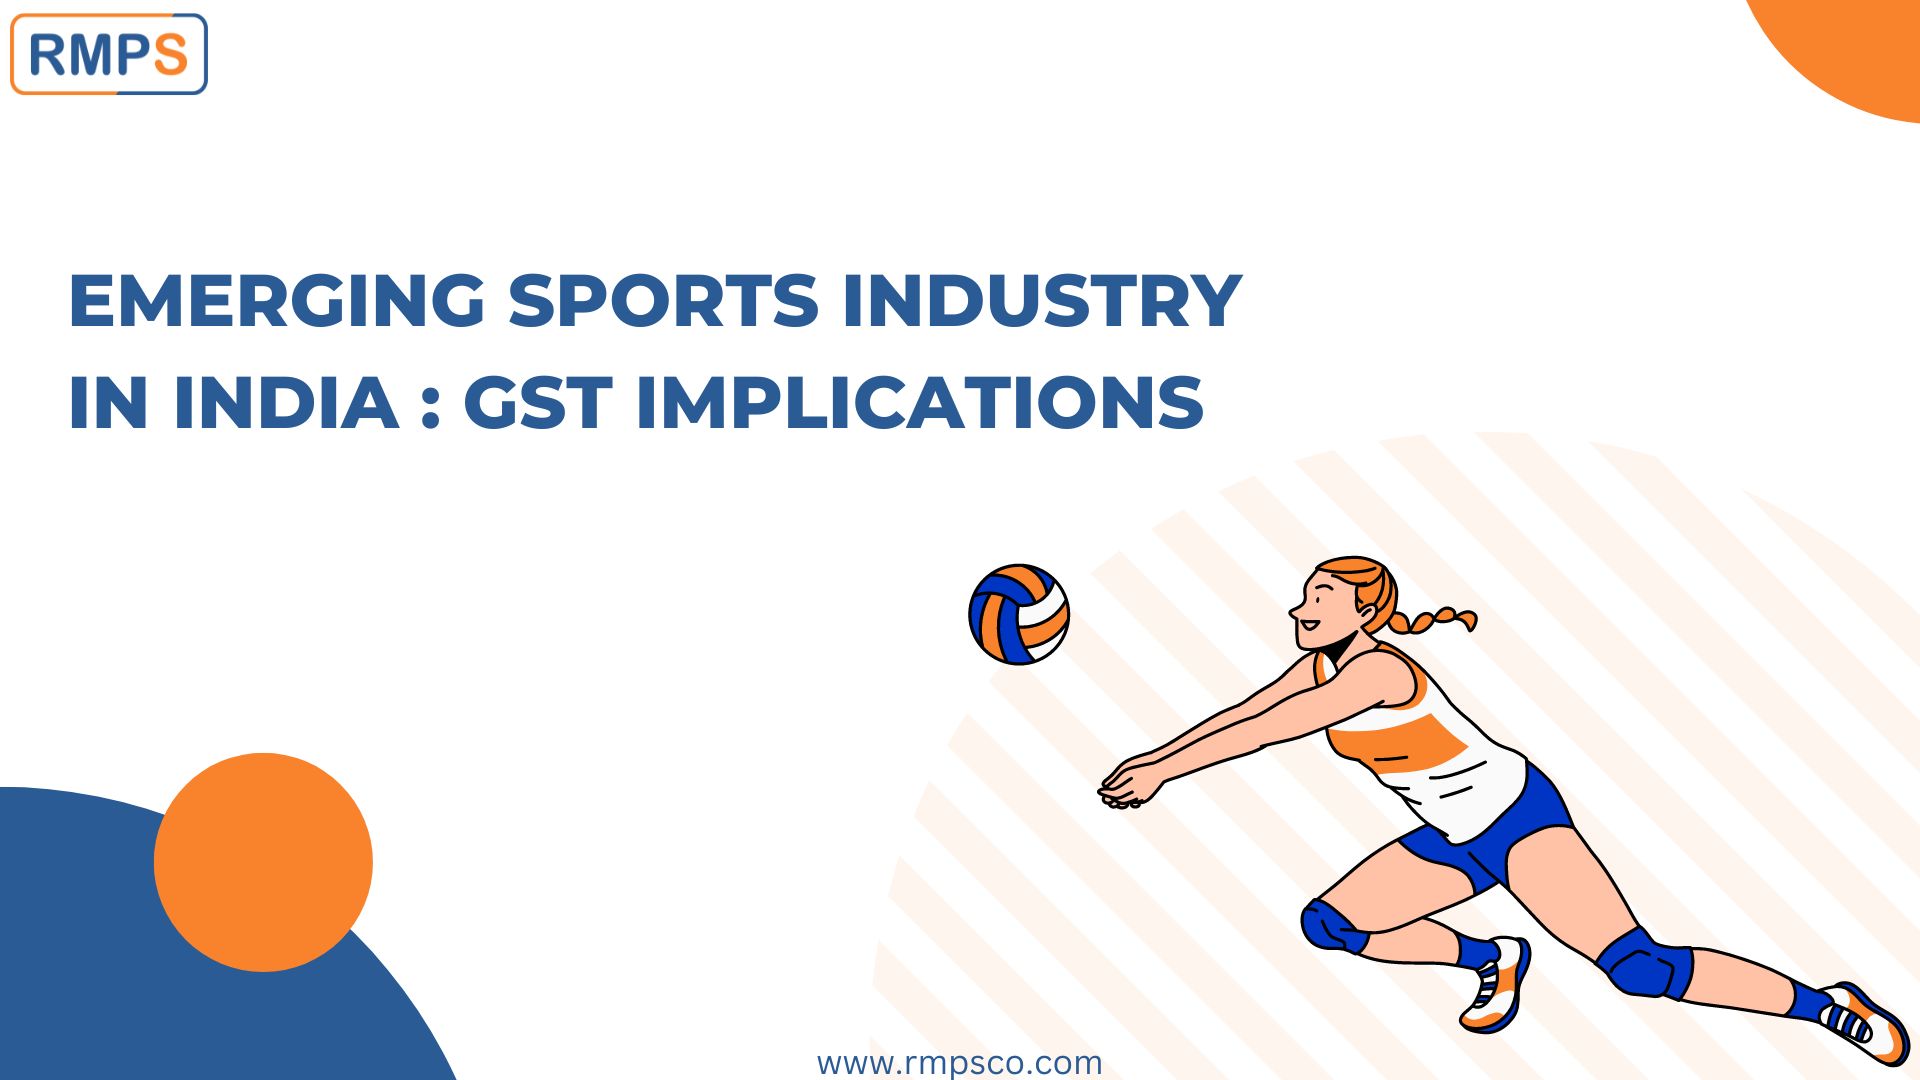 Emerging Sports Industry in India GST Implications